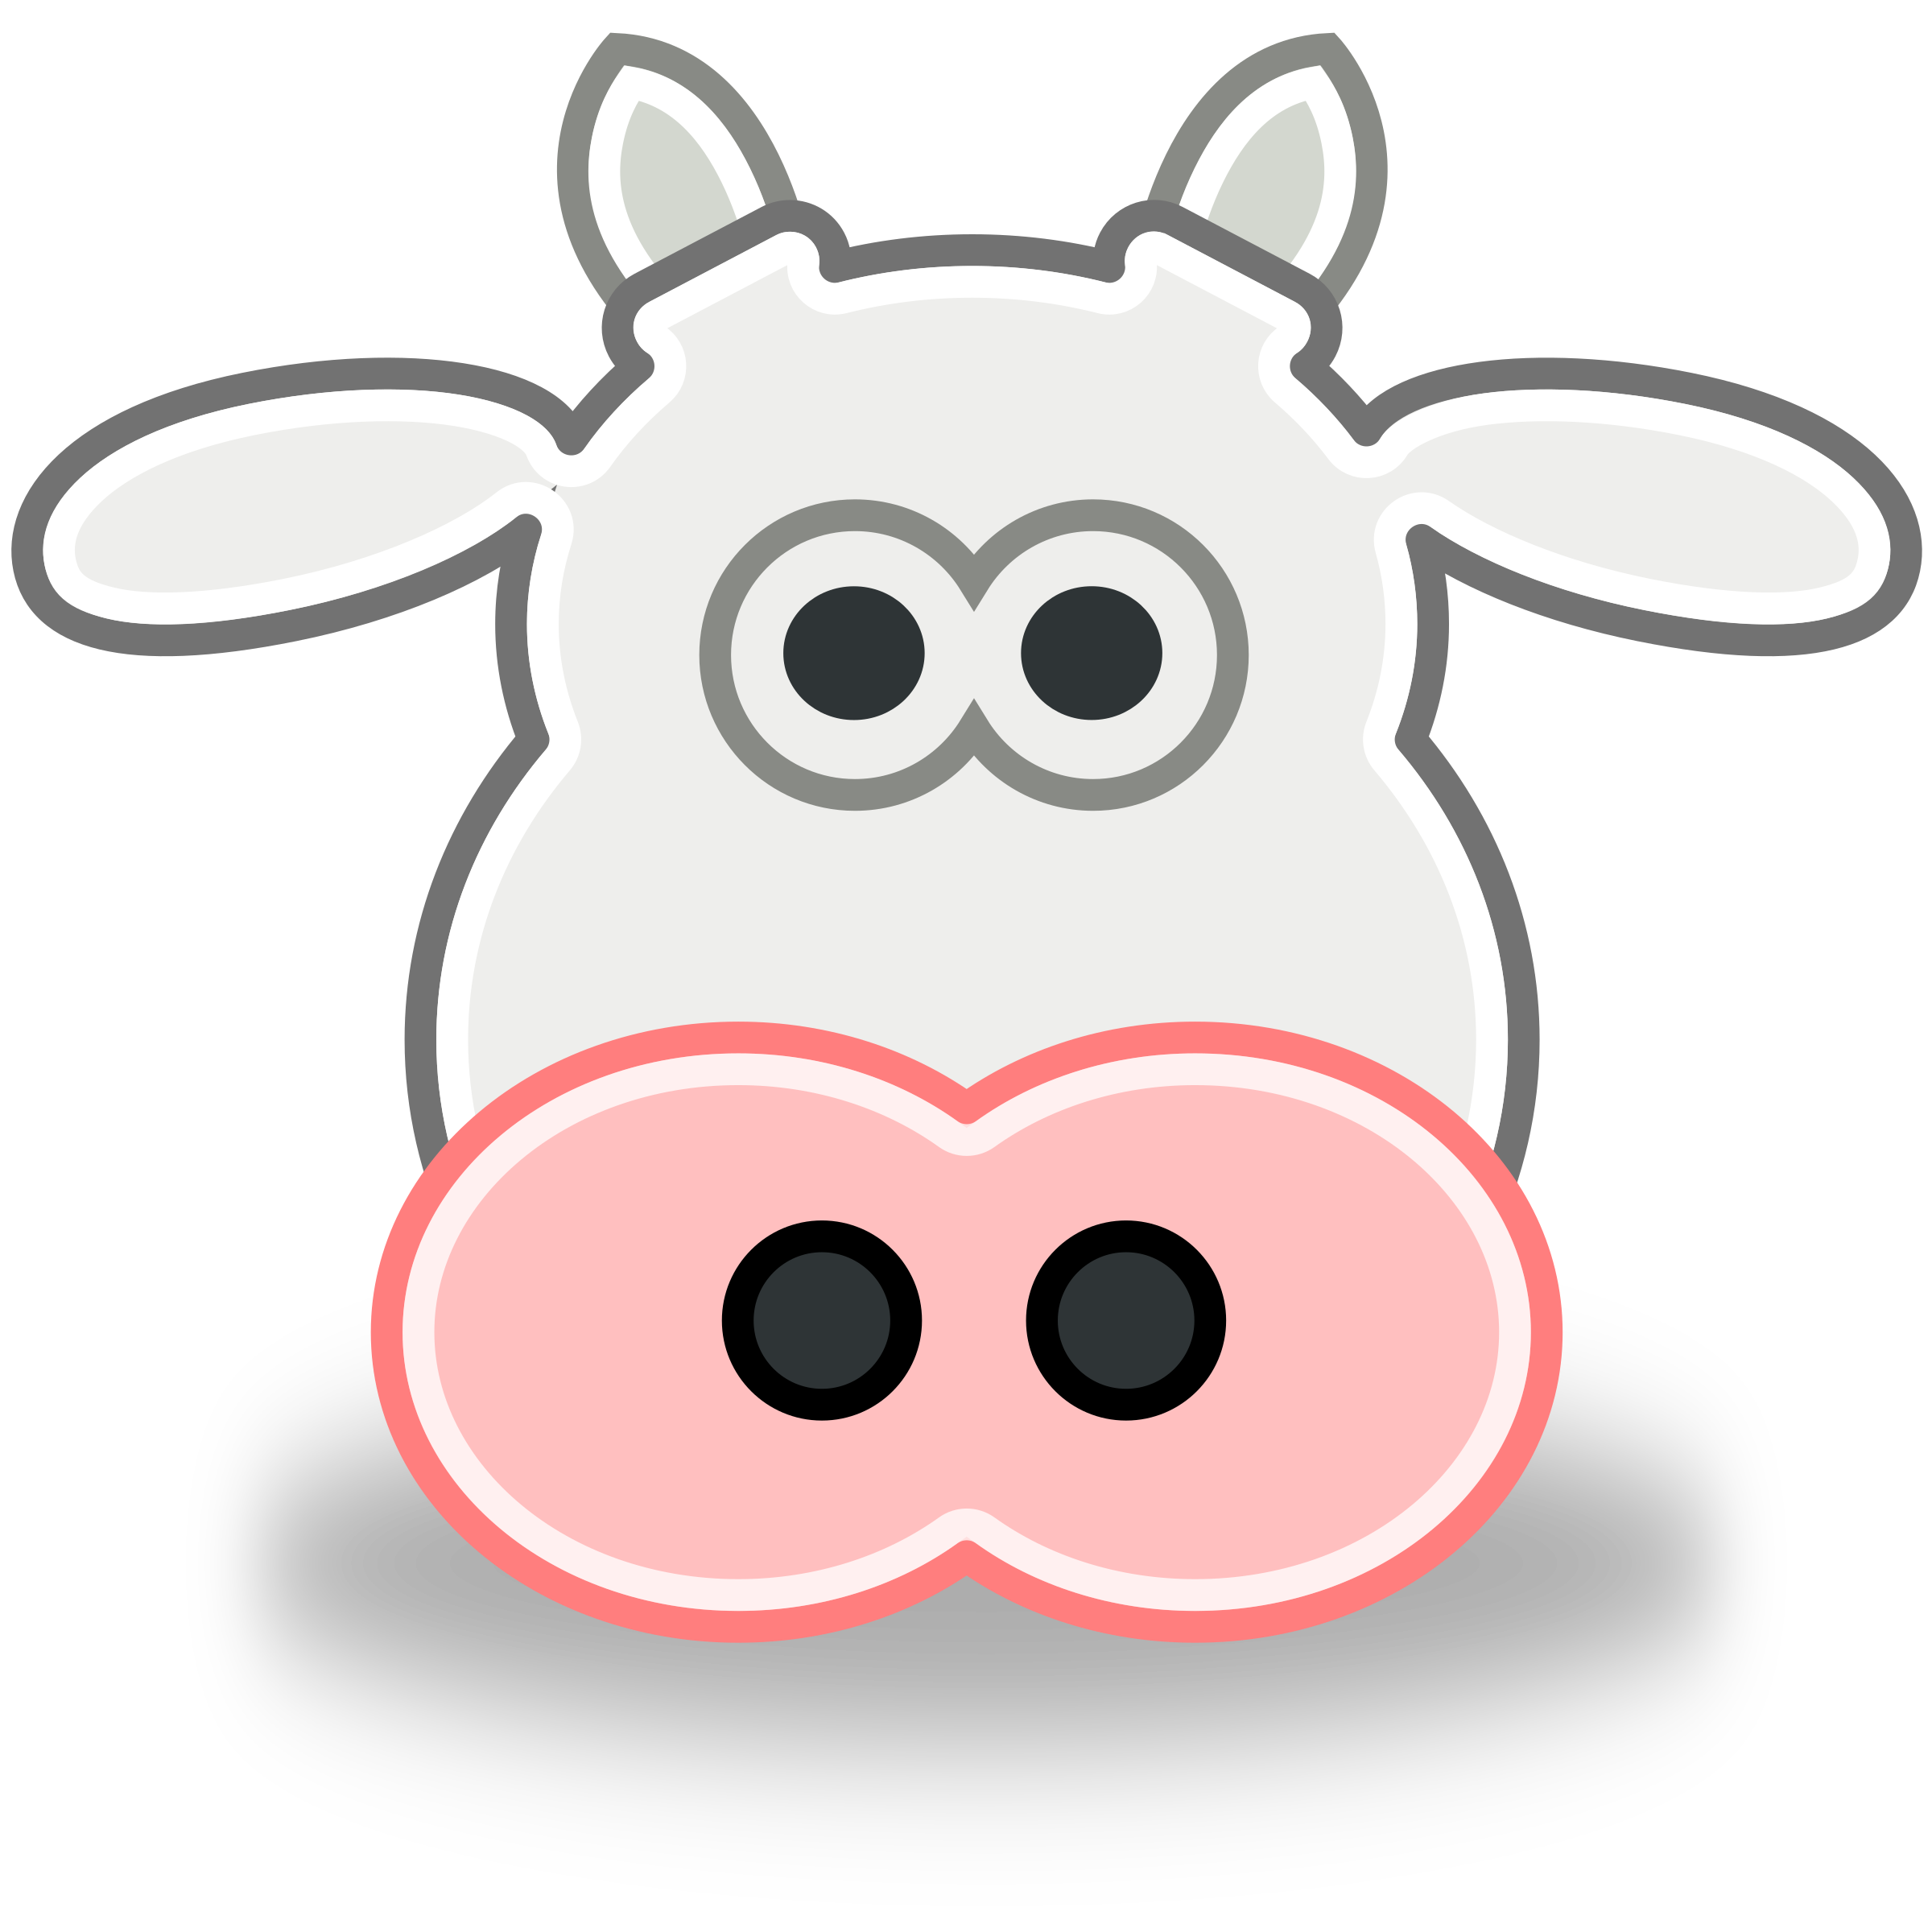 Big Image (Png) - Cow Head, Transparent background PNG HD thumbnail